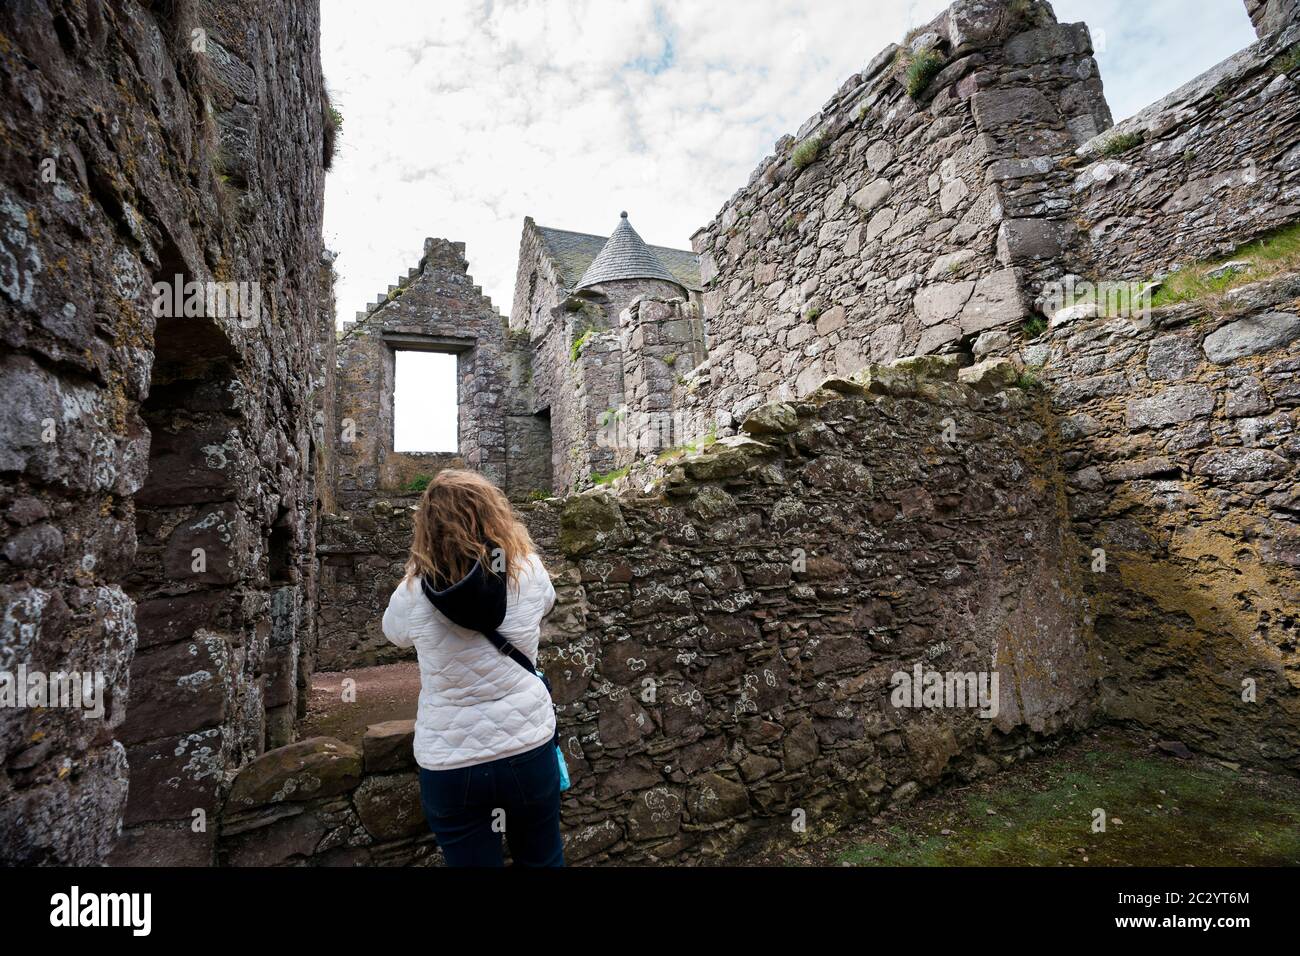 A blond tourist explores the crumbling walls under a cloudy sky in the stone ruined castle of Dunnottar, Stonehaven, Scotland, UK Stock Photo